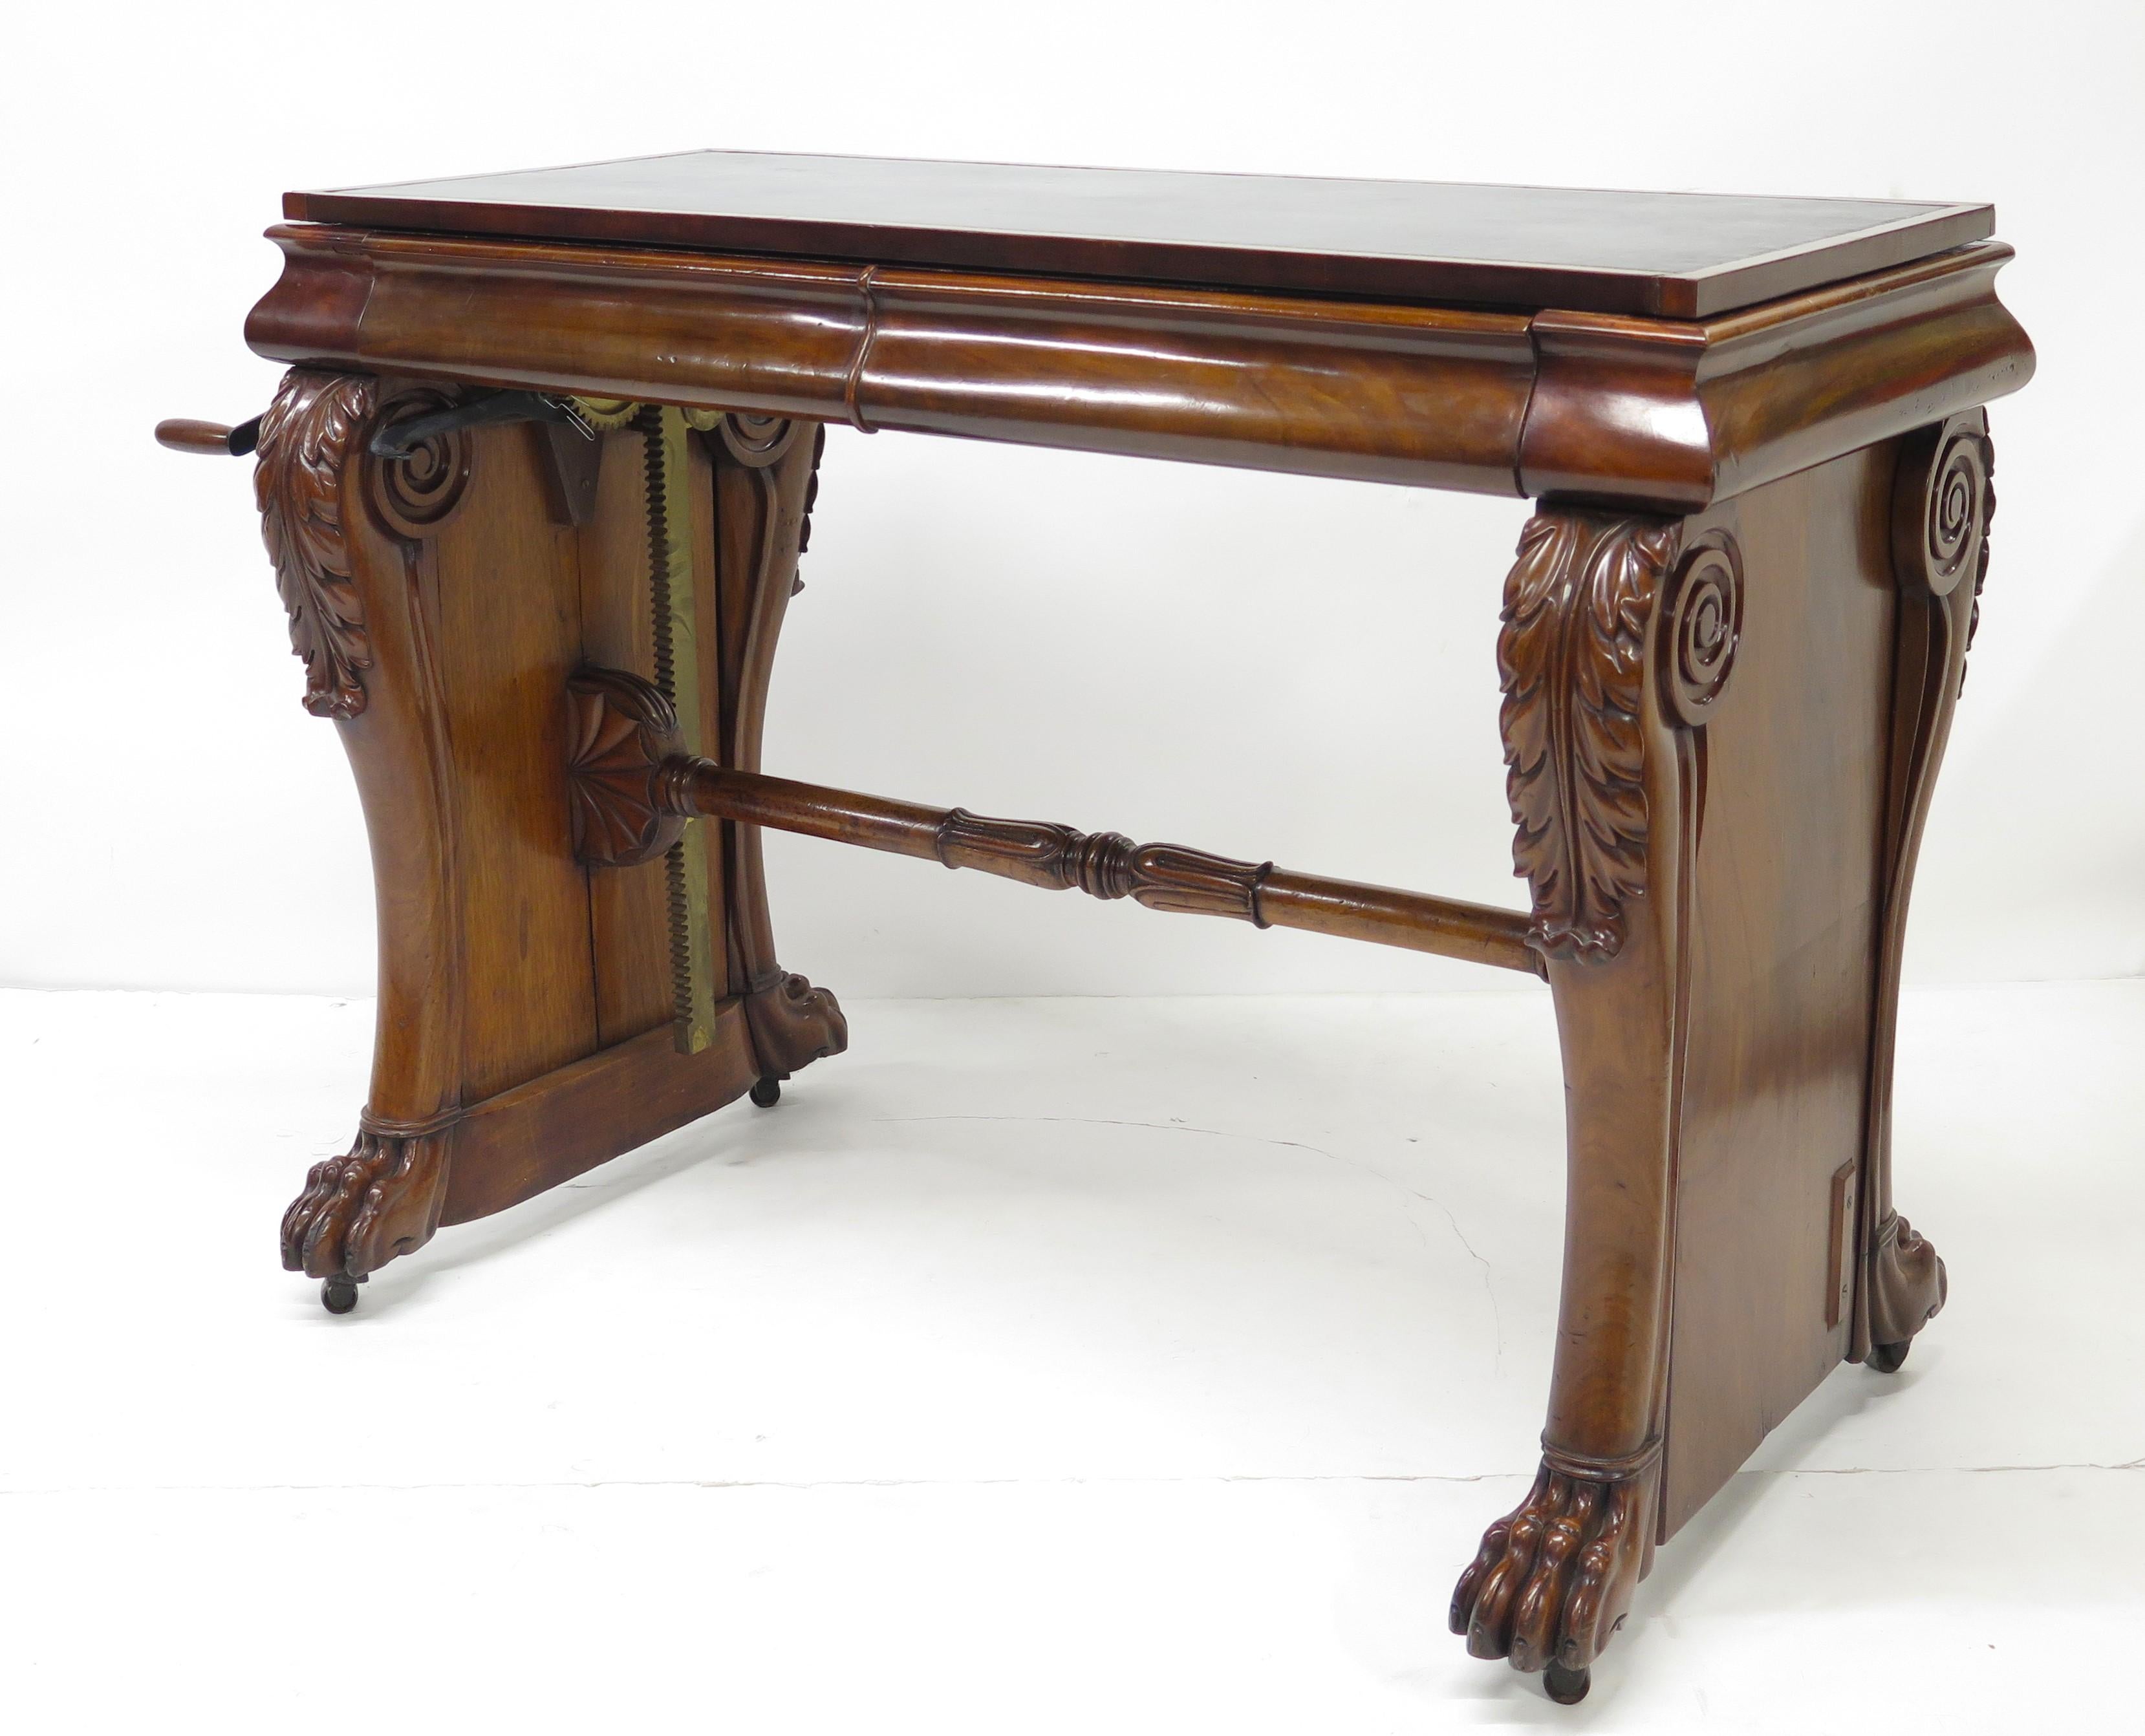 Irish William IV Mahogany Stretcher Based Library Table with Black Leather Top For Sale